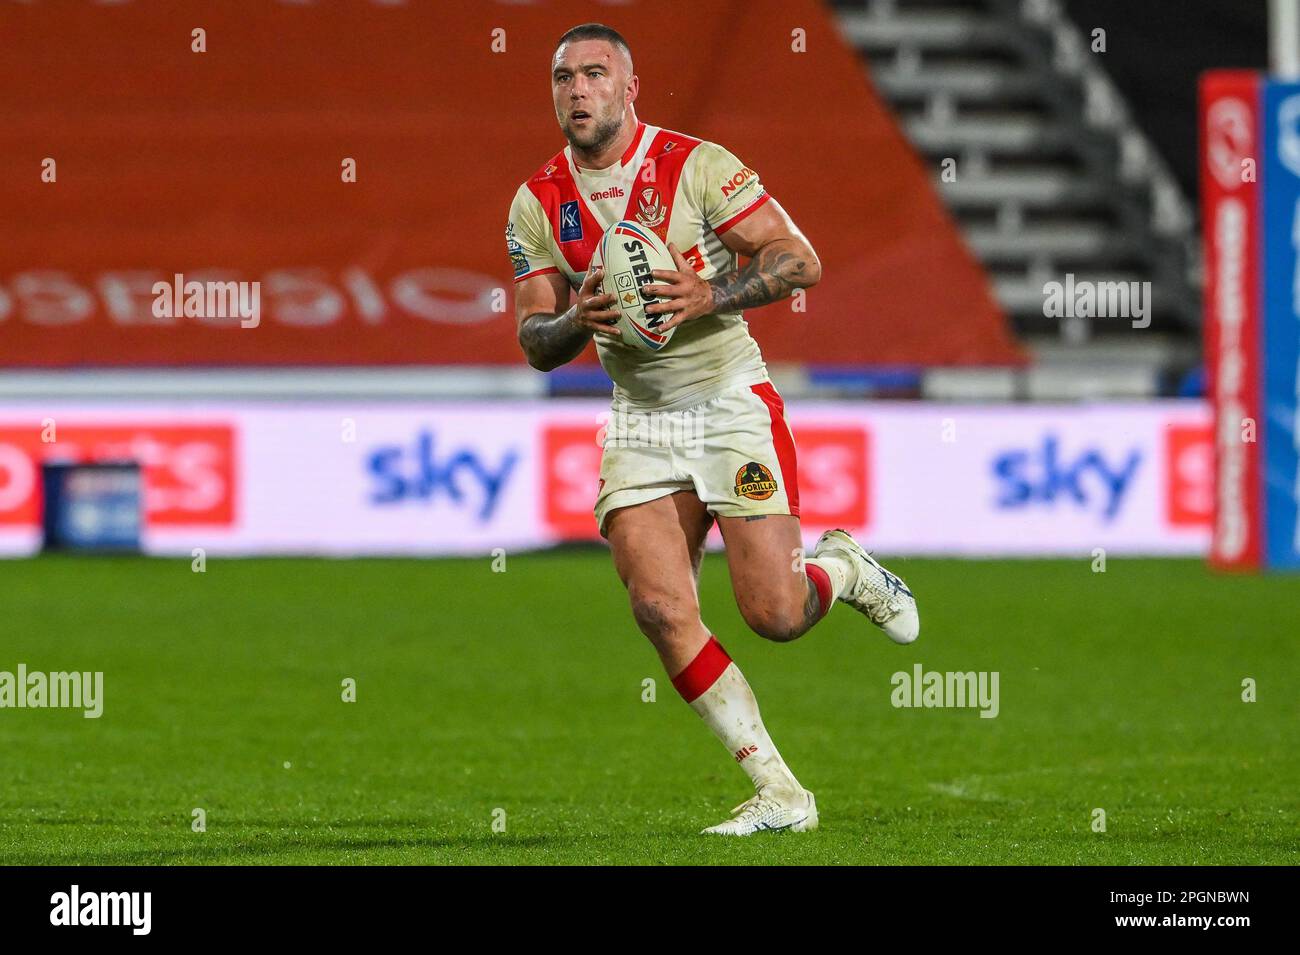 Curtis Sironen #16 of St Helens in action during the Betfred Super League Round 6 match Huddersfield Giants vs St Helens at John Smith's Stadium, Huddersfield, United Kingdom, 23rd March 2023  (Photo by Craig Thomas/News Images) Stock Photo